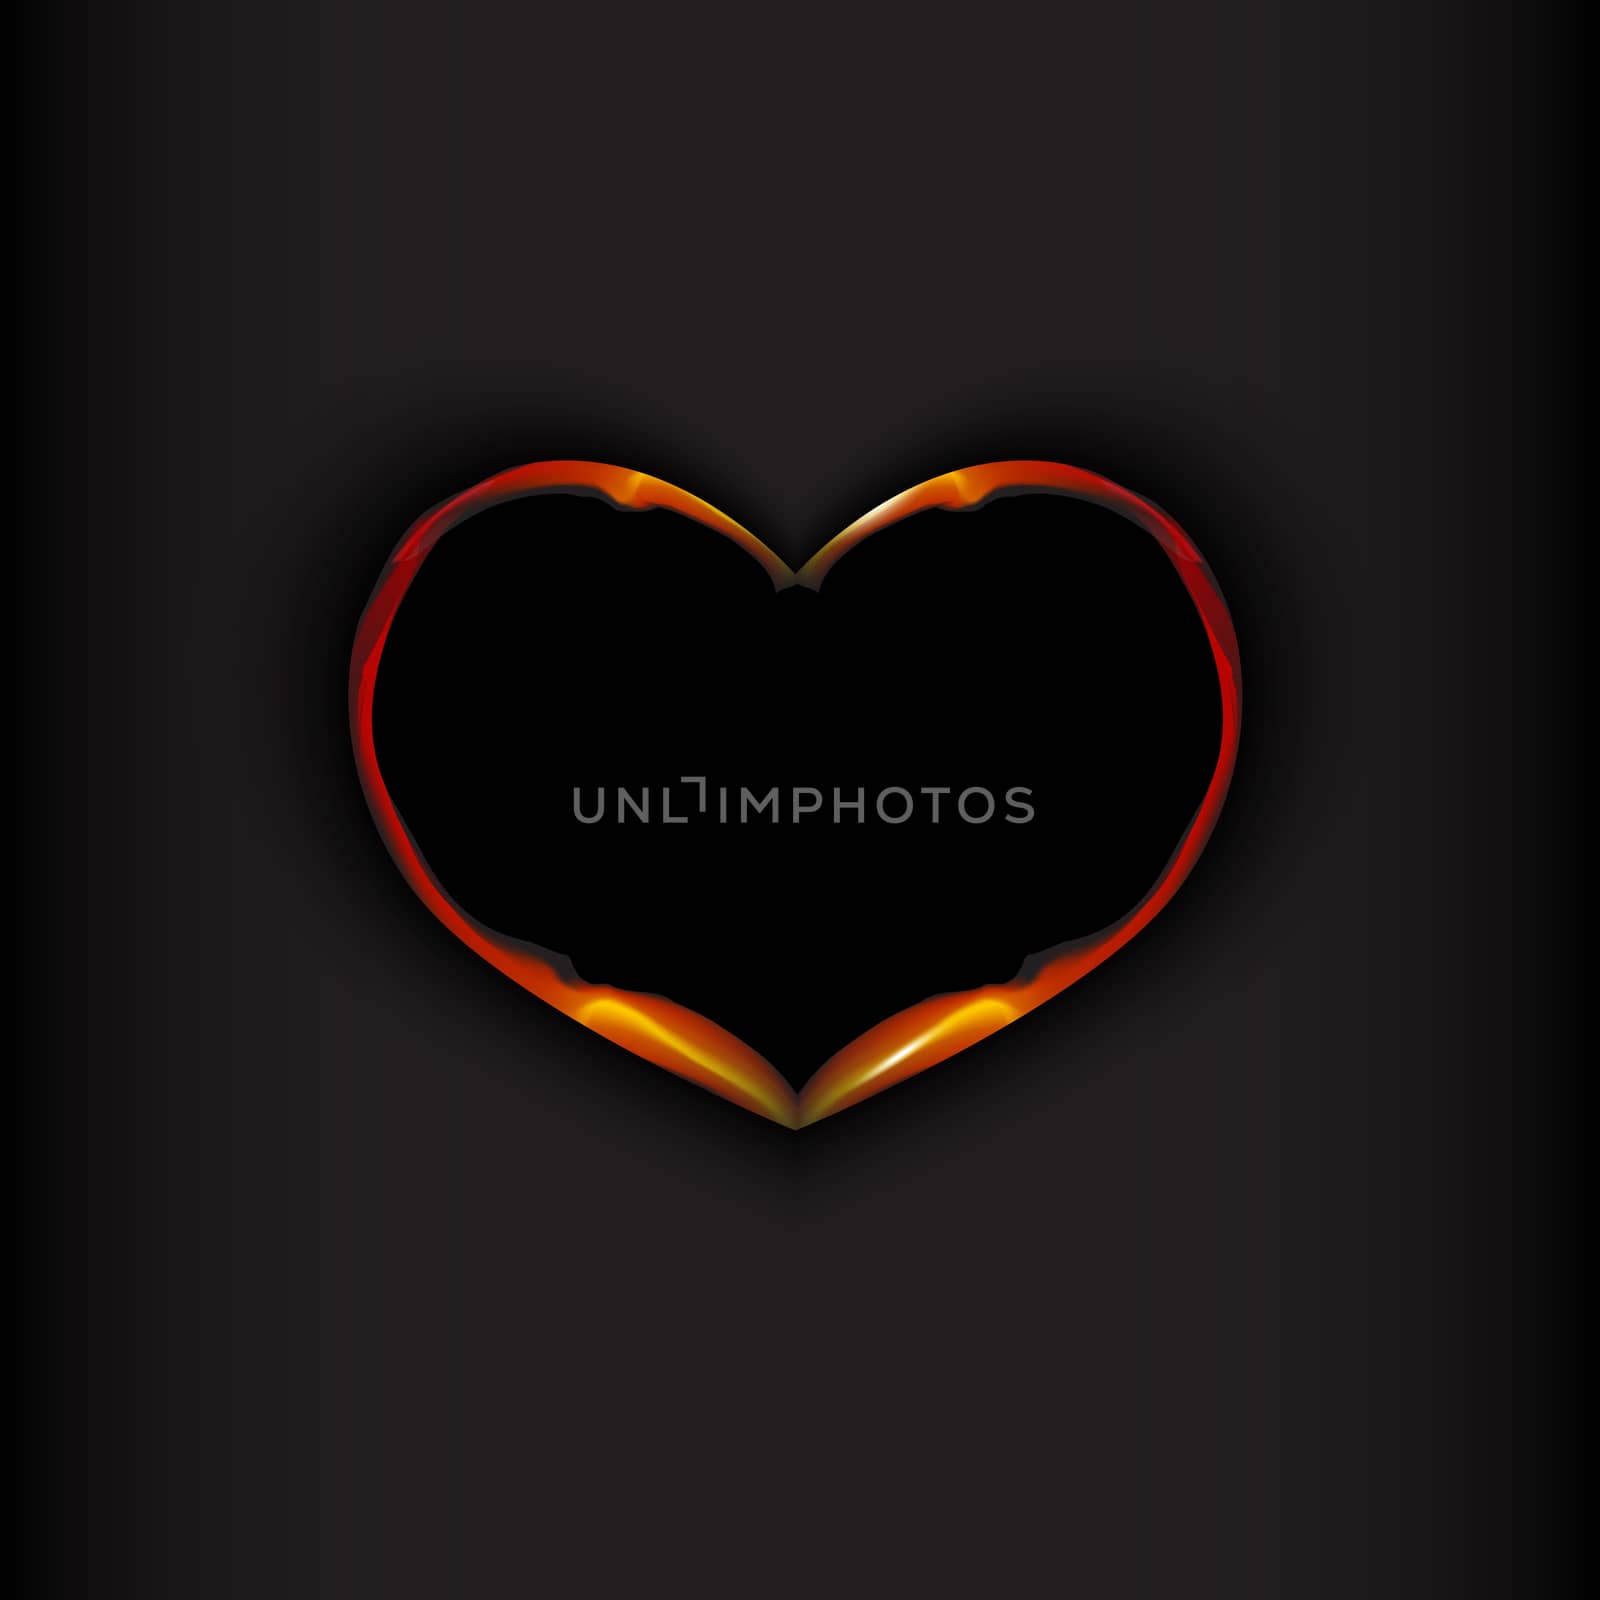 Fire heart on black background. Valentines day concept. Vector